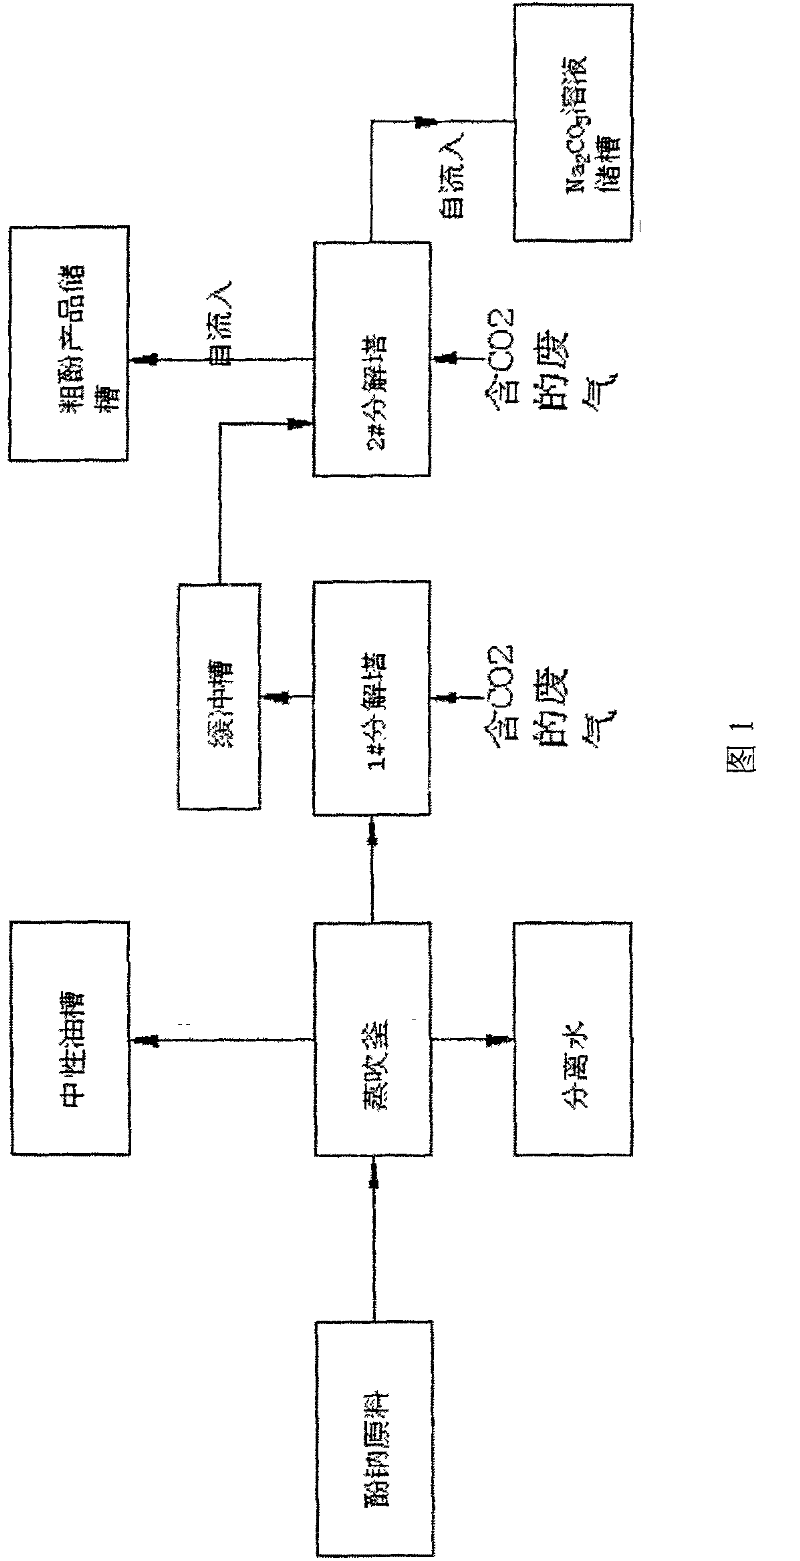 Method for decomposing sodium phenolate using low CO2-content exhaust gas